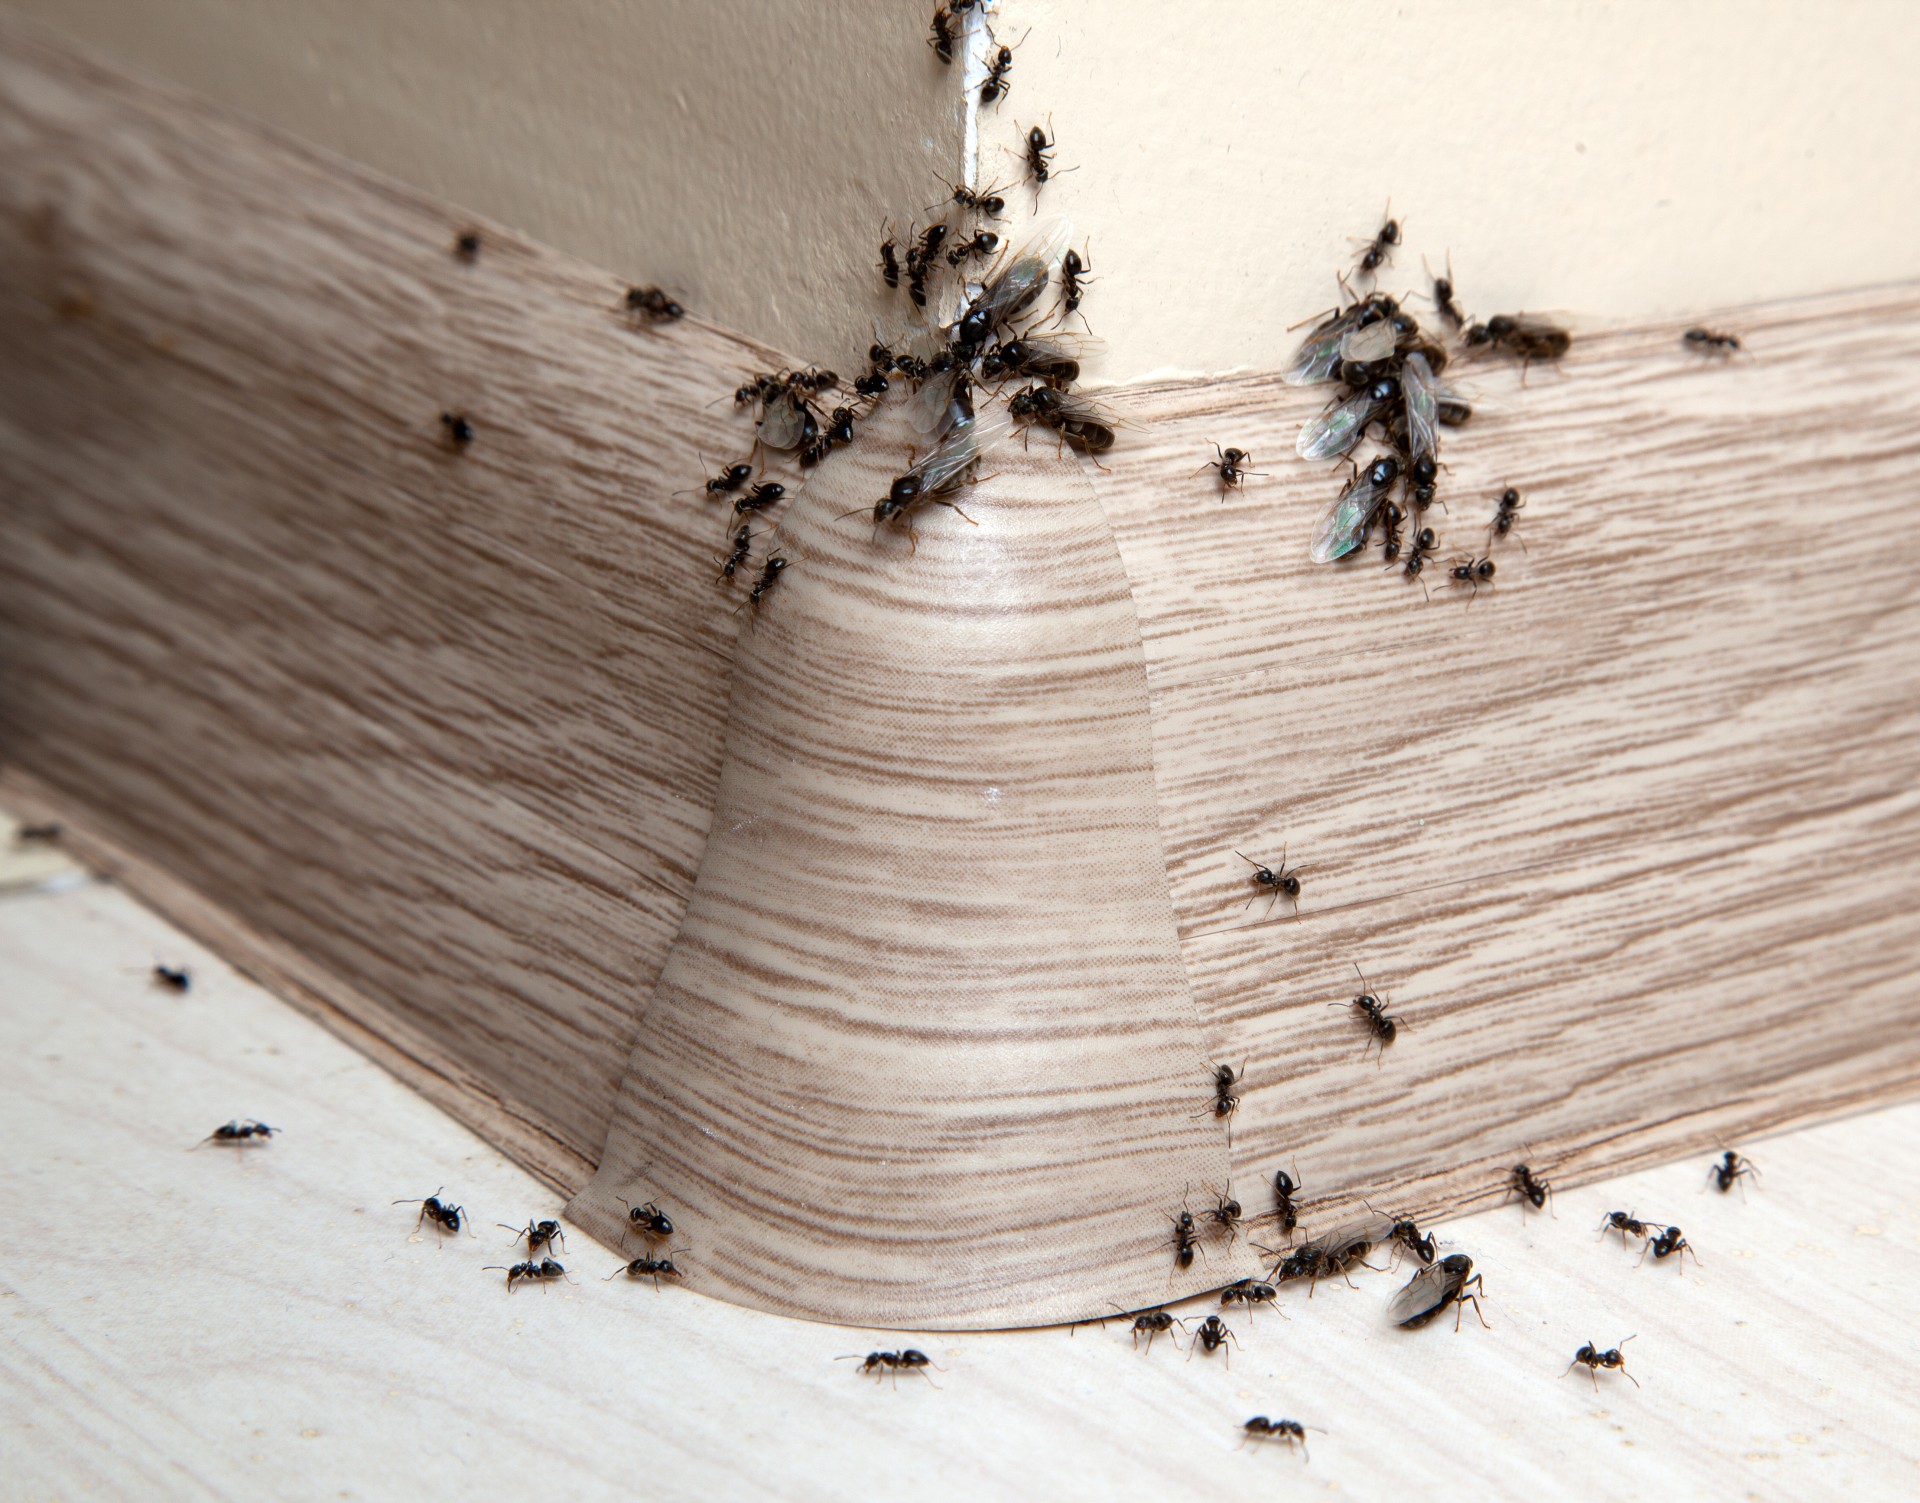 Ant Infestation, Pest Control in Enfield, EN1. Call Now 020 8166 9746